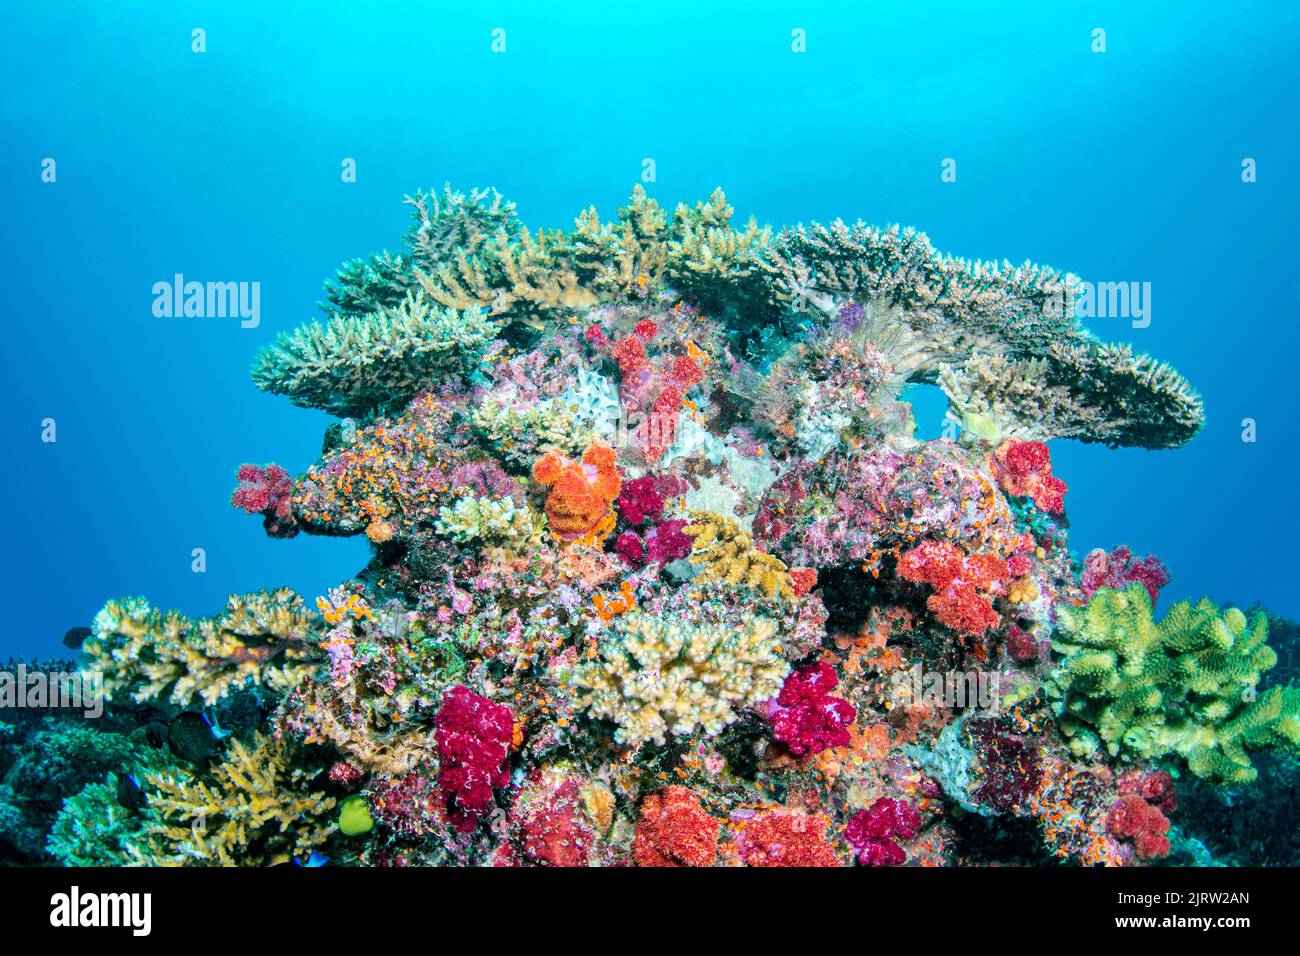 Beautiful coral reef in Fiji shows the wonder of life under the water with vibrant corals, clear water and a healthy ecosystem Stock Photo